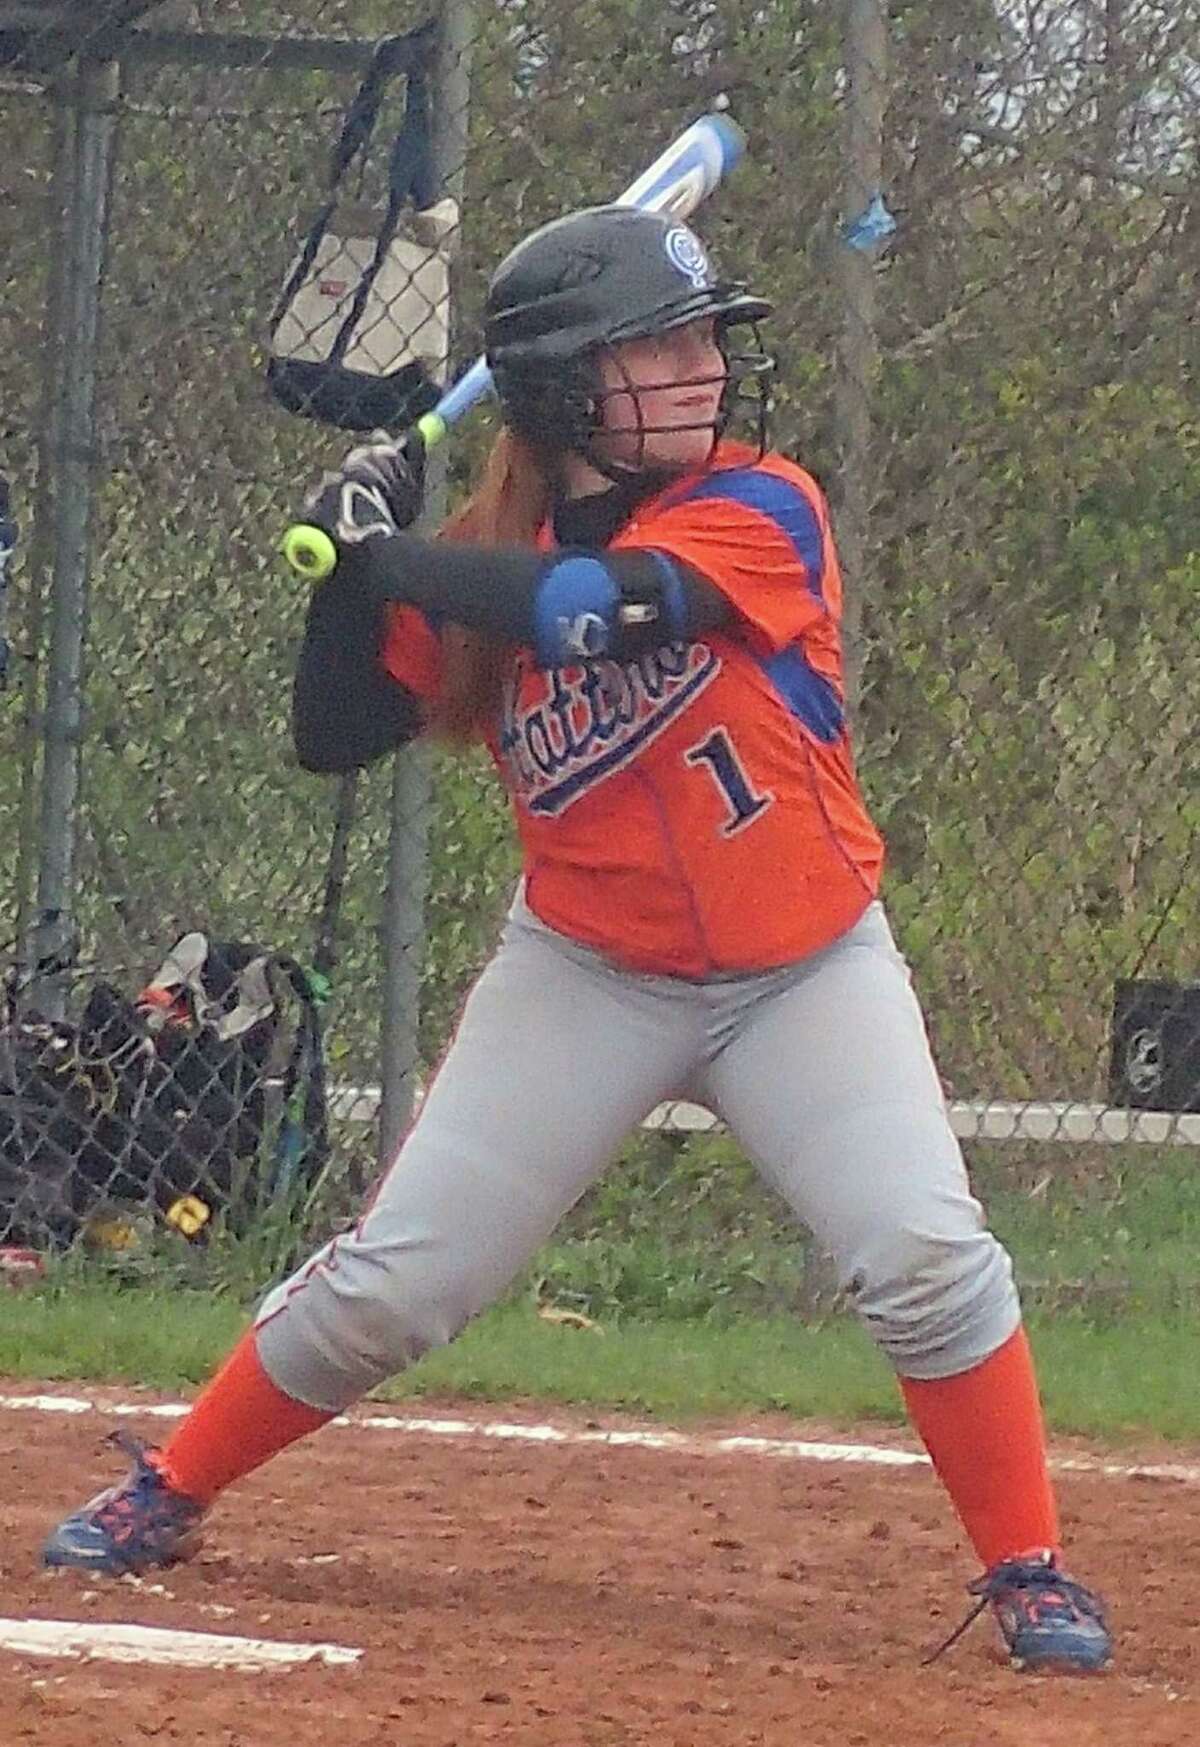 Danbury's Alyssa Timan had a single and a sacrifice bunt in the Hatters' 12-6 softball victory over Trinity Catholic at Danbury High School May 4, 2016.